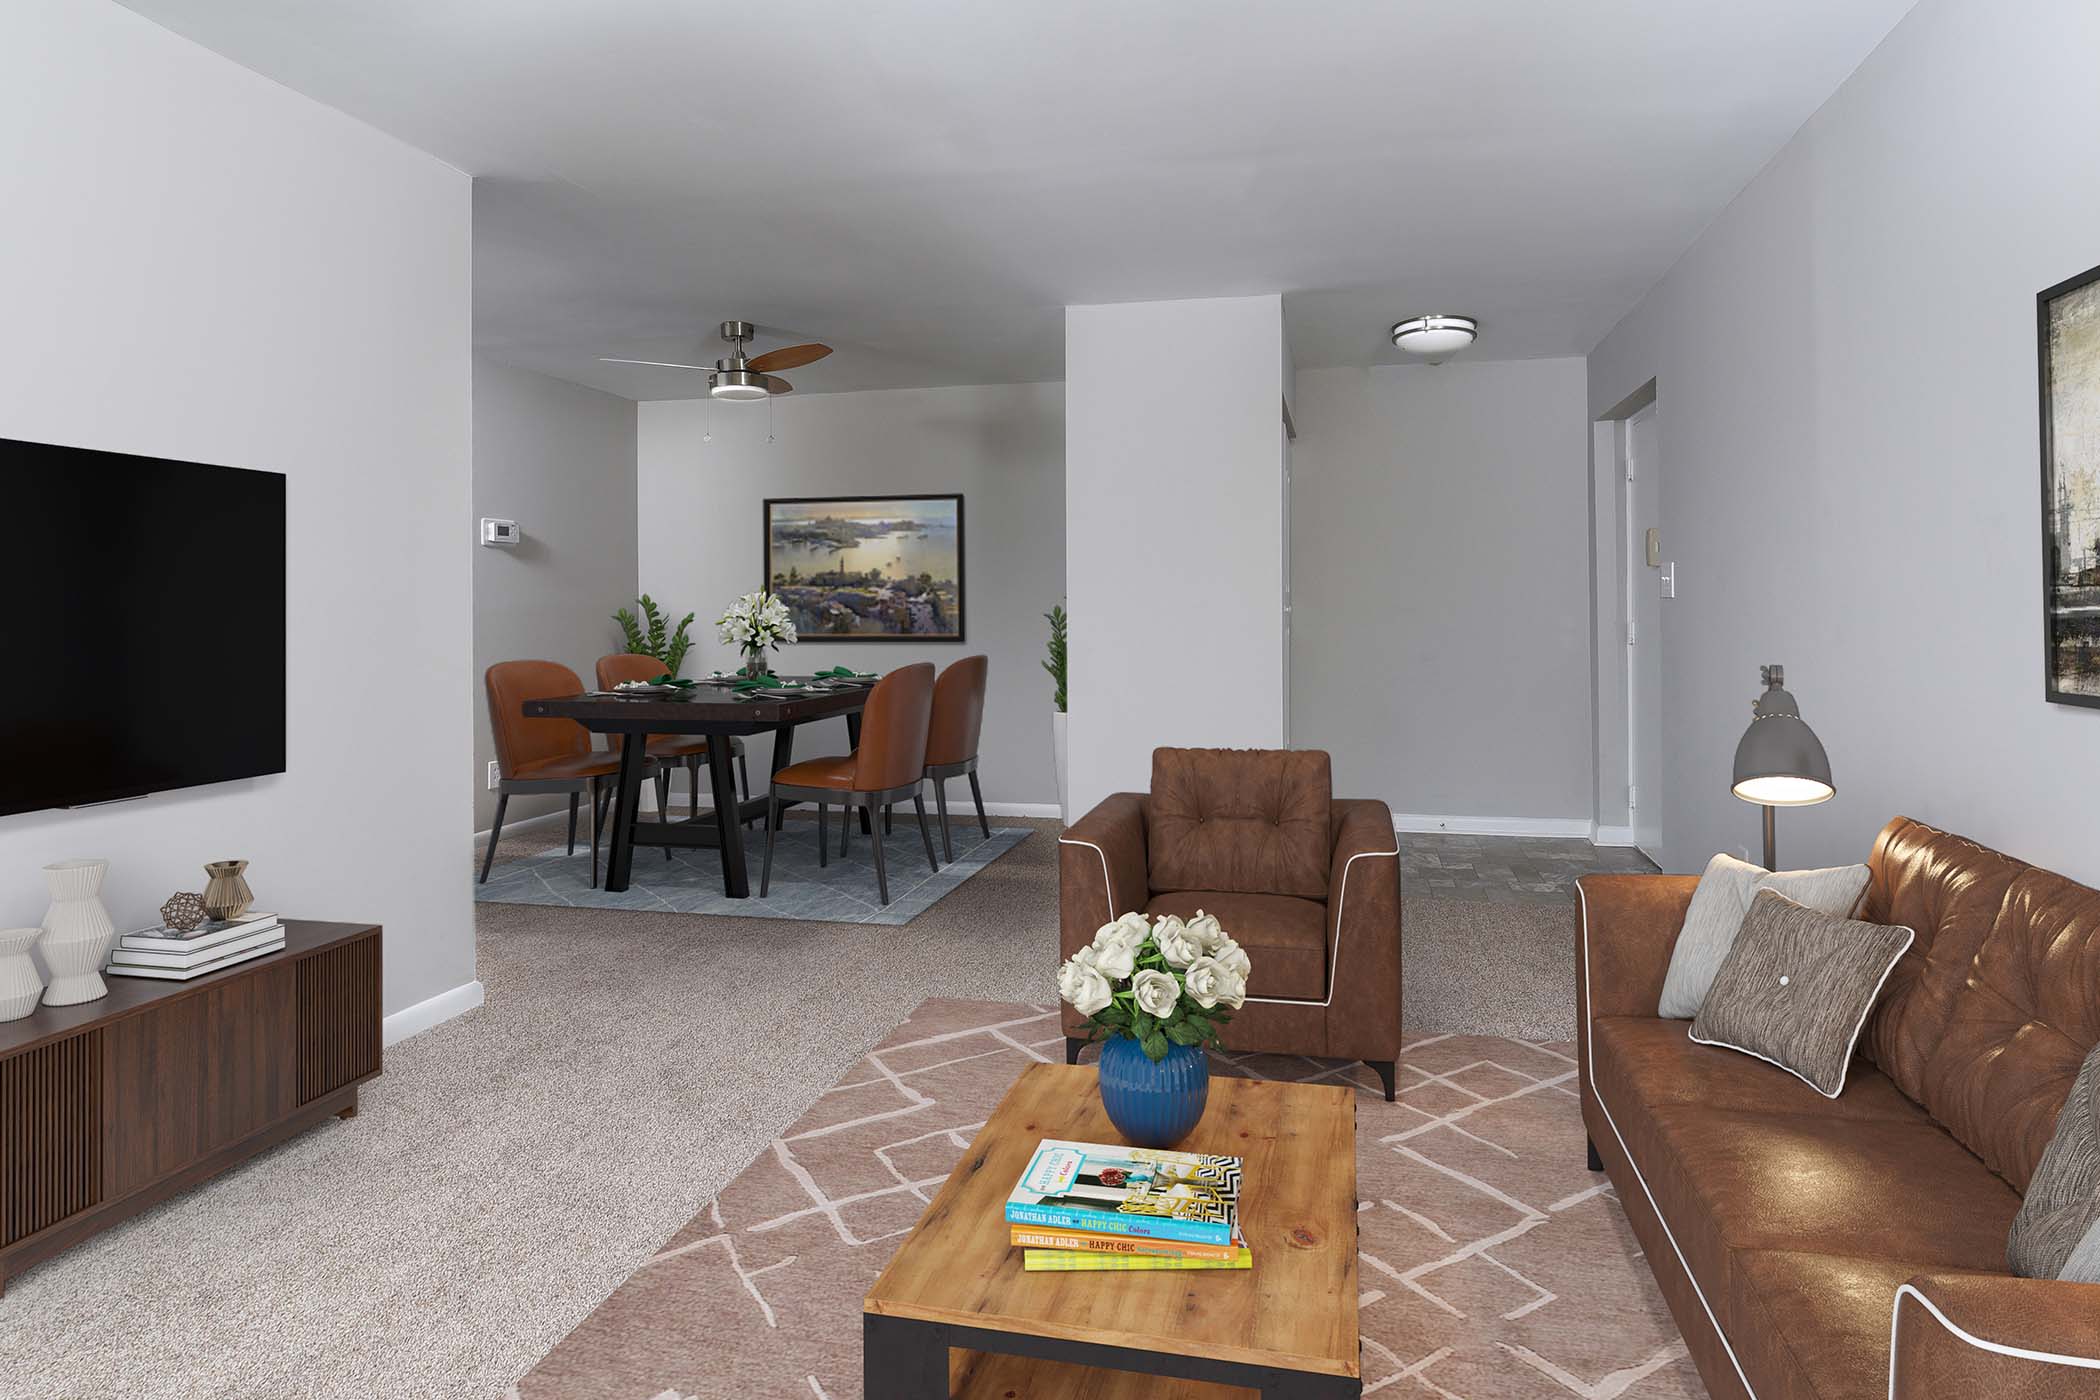 View Floor Plans at The Flats at Columbia Pike, Silver Spring, Maryland